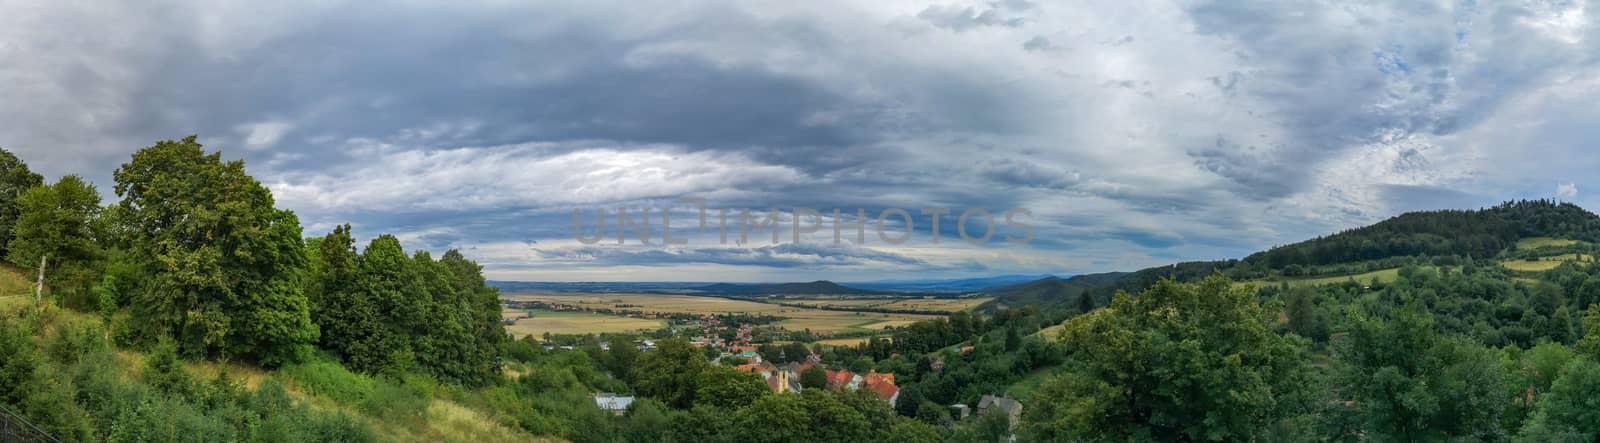 Panoramic view of small village in mountains and a lot of fields by Wierzchu